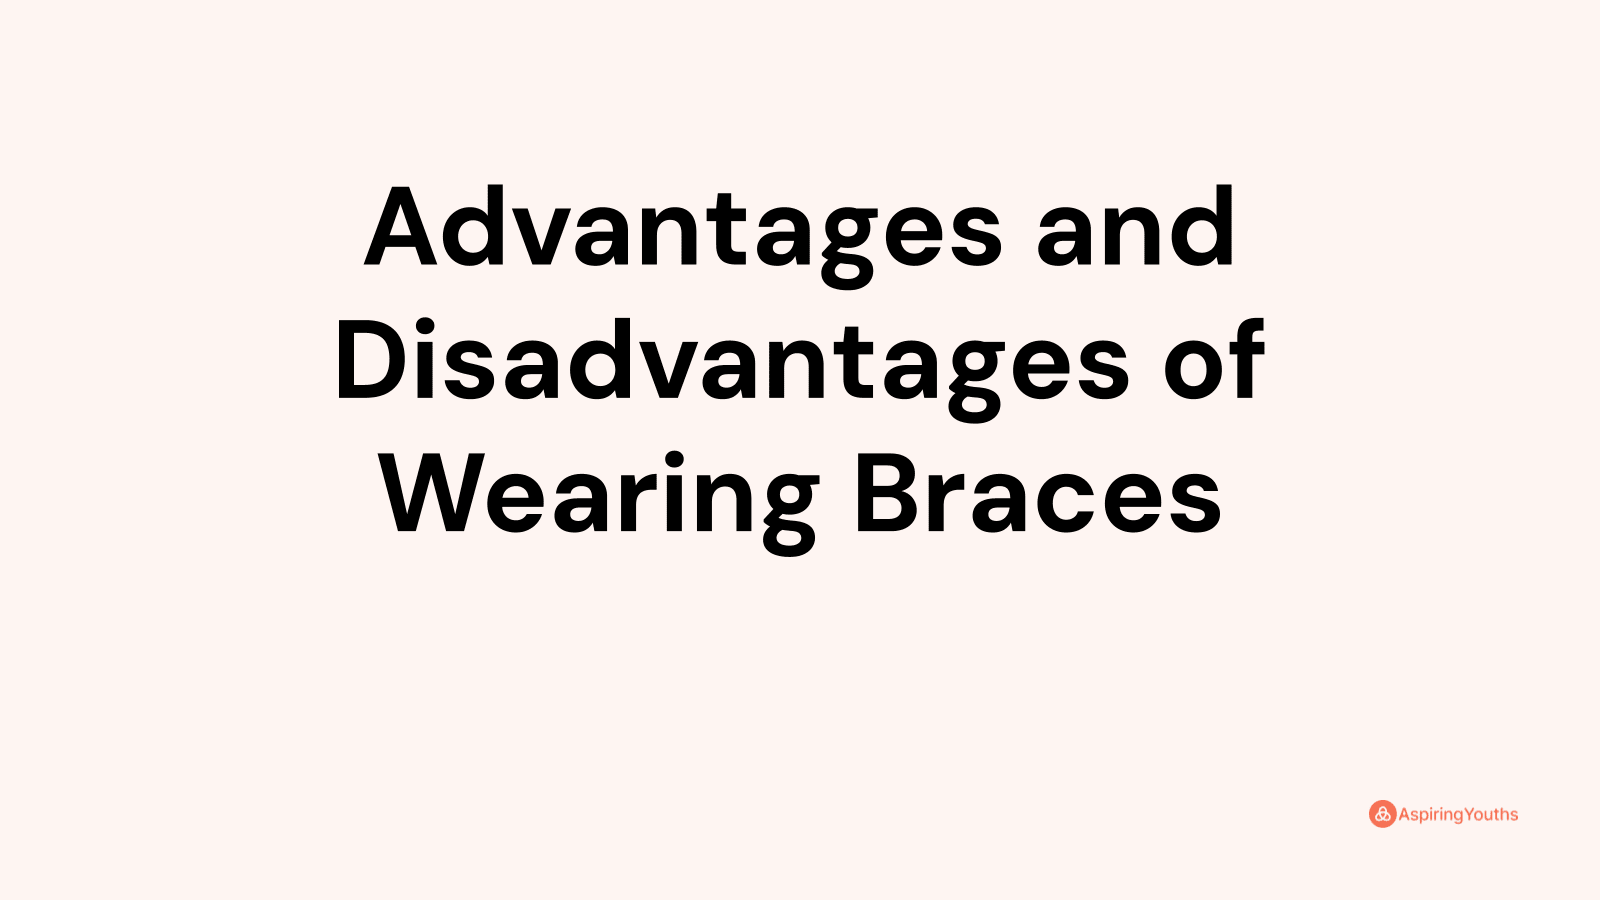 Advantages and disadvantages of Wearing Braces